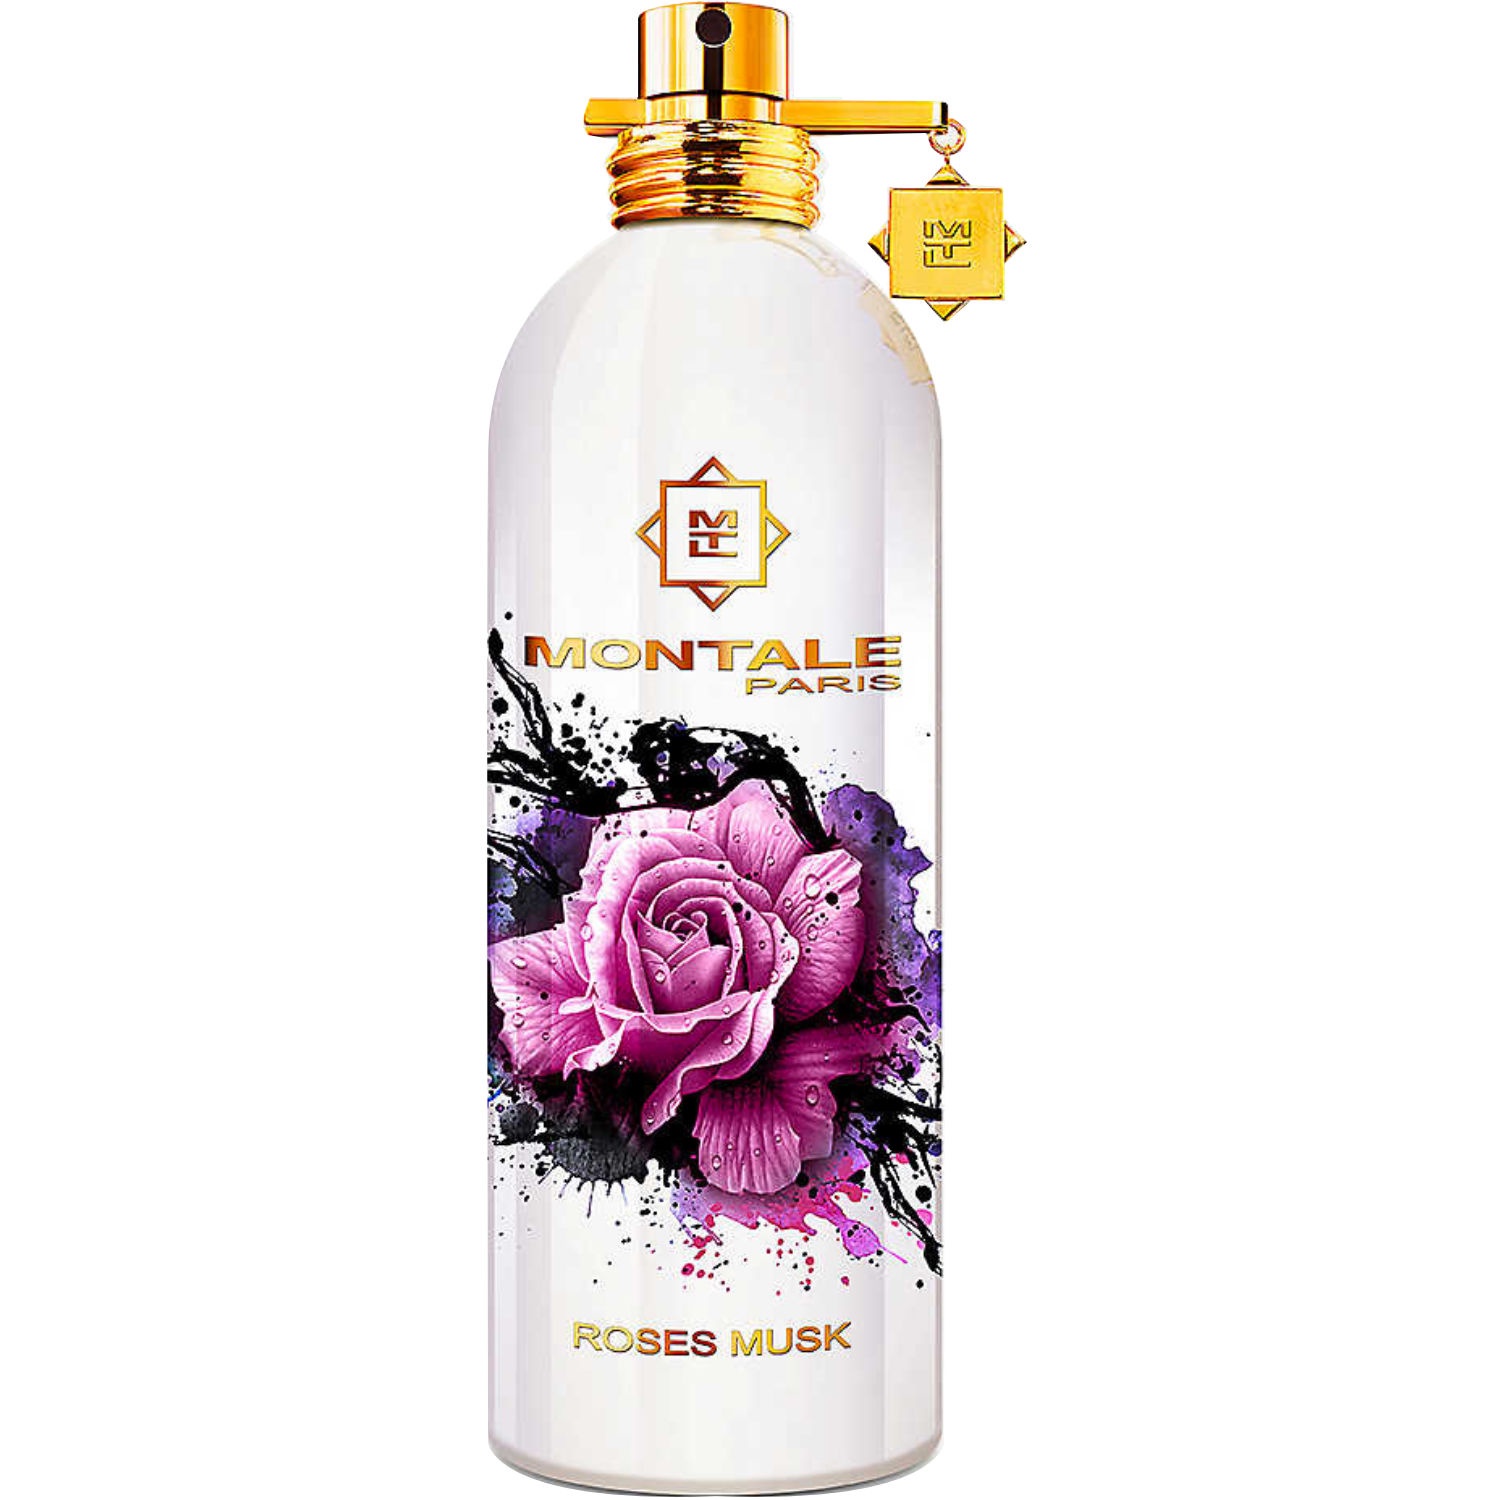 Roses musk парфюмерная вода. Духи Montale Roses Musk. Духи Монталь Розес МУСК. Духи Монталь женские Roses Musk.